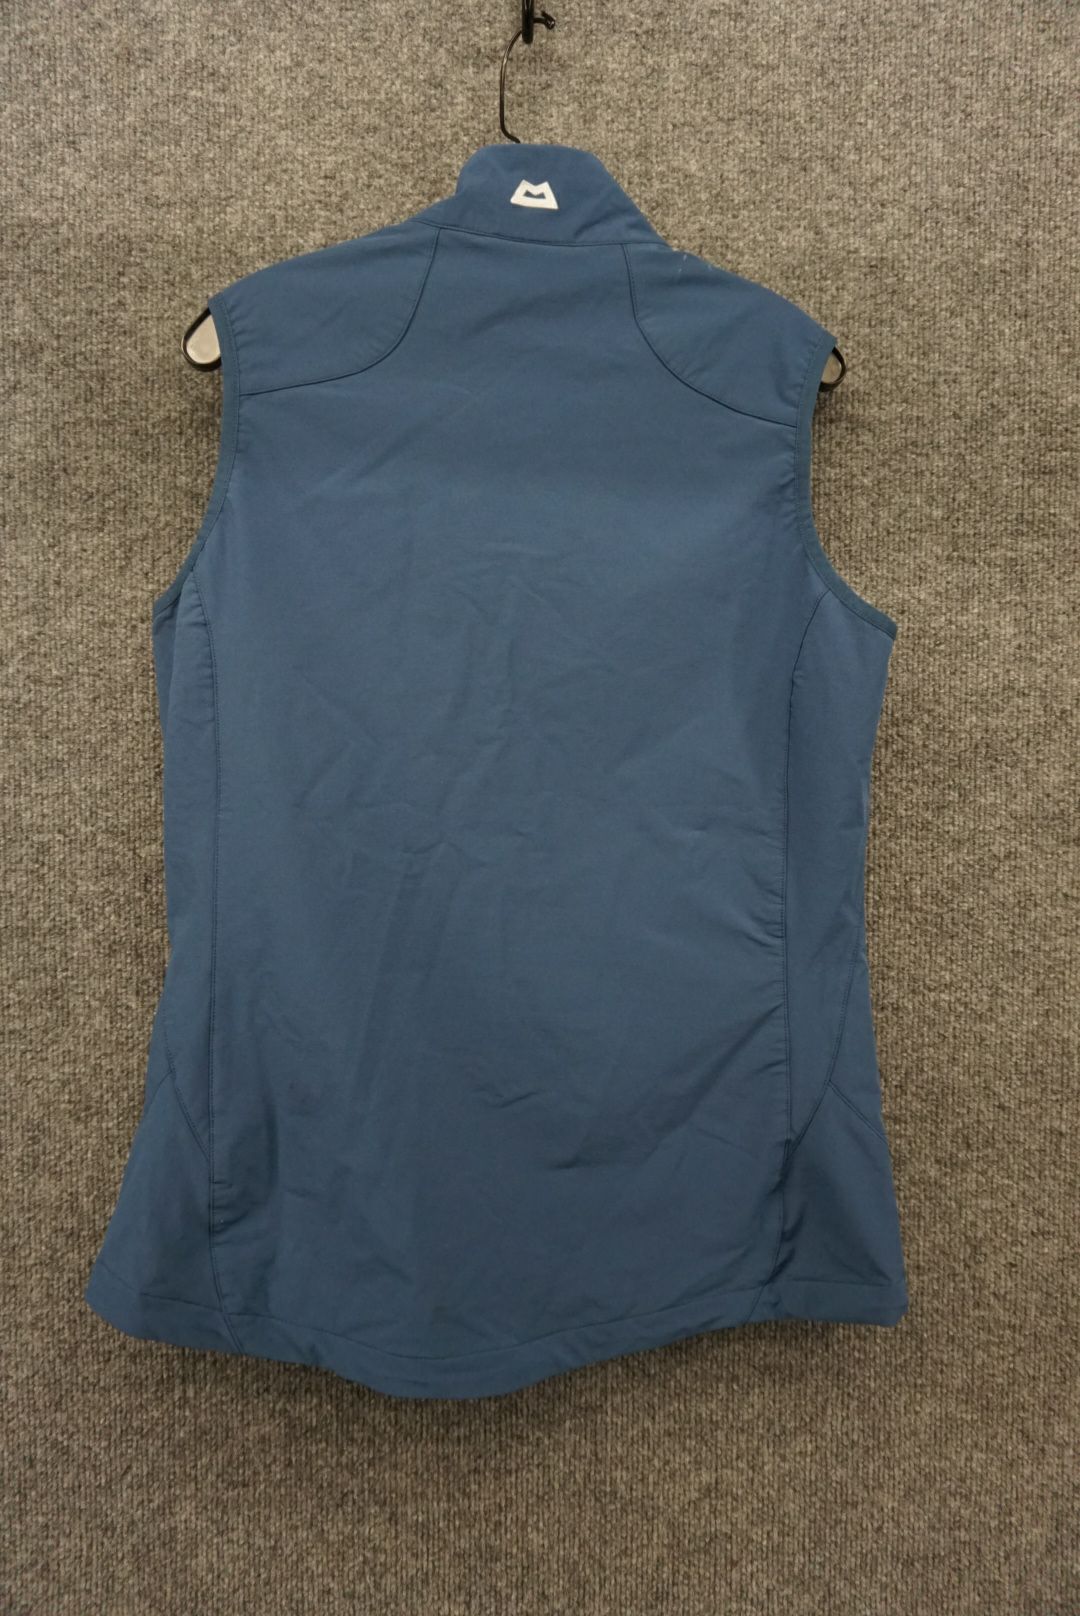 Mountain Equipment Navy Blue Size W10 Women's Synthetic Vest